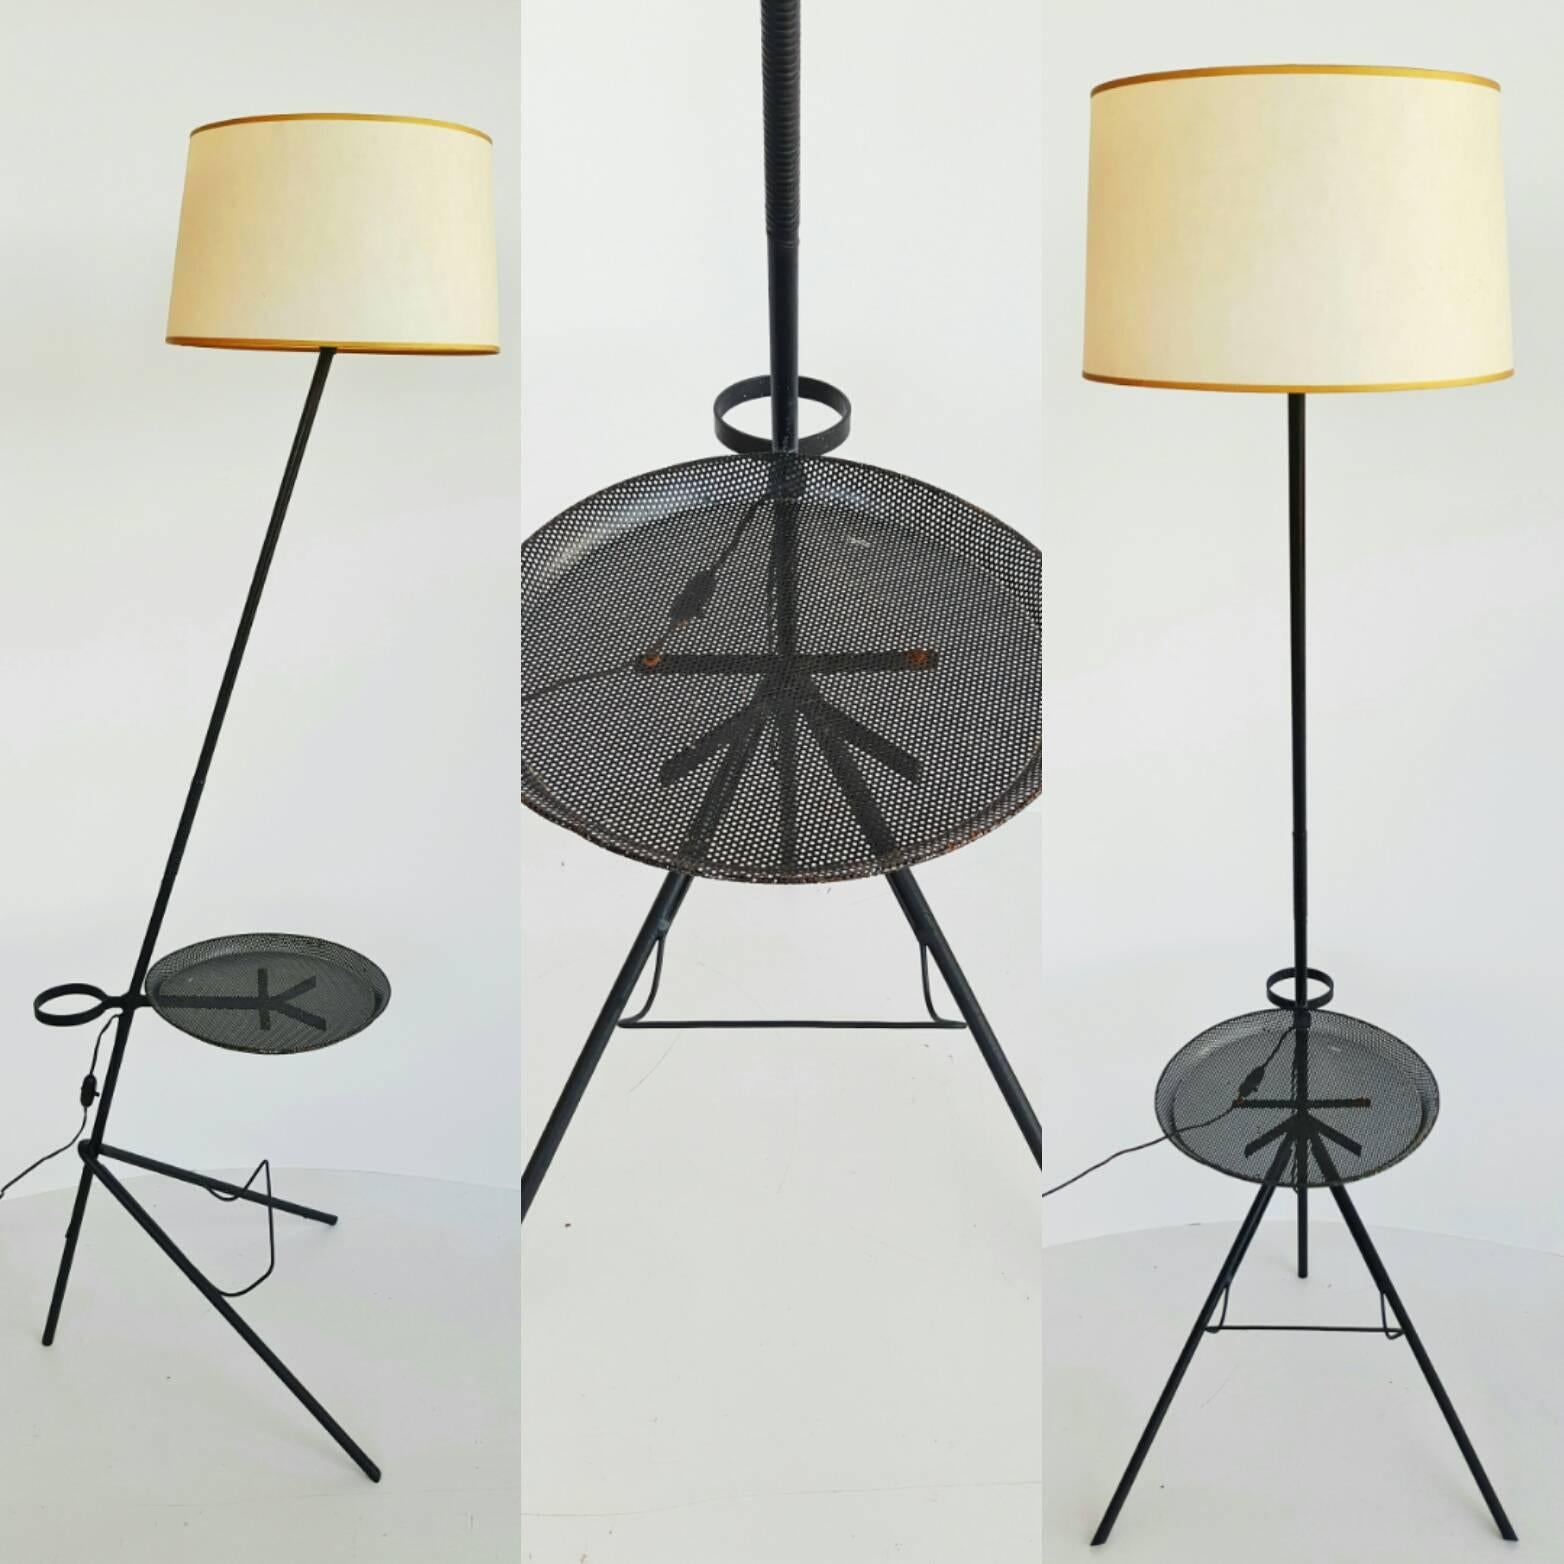 Rare and beautiful Mathieu Matégot floor lamp, manufactured by Ateliers Matégot (France), circa 1950. Lacquered metal structure with original paint, with built in magazine rack and drink holder. The ring up top would be for either a flower pot or an